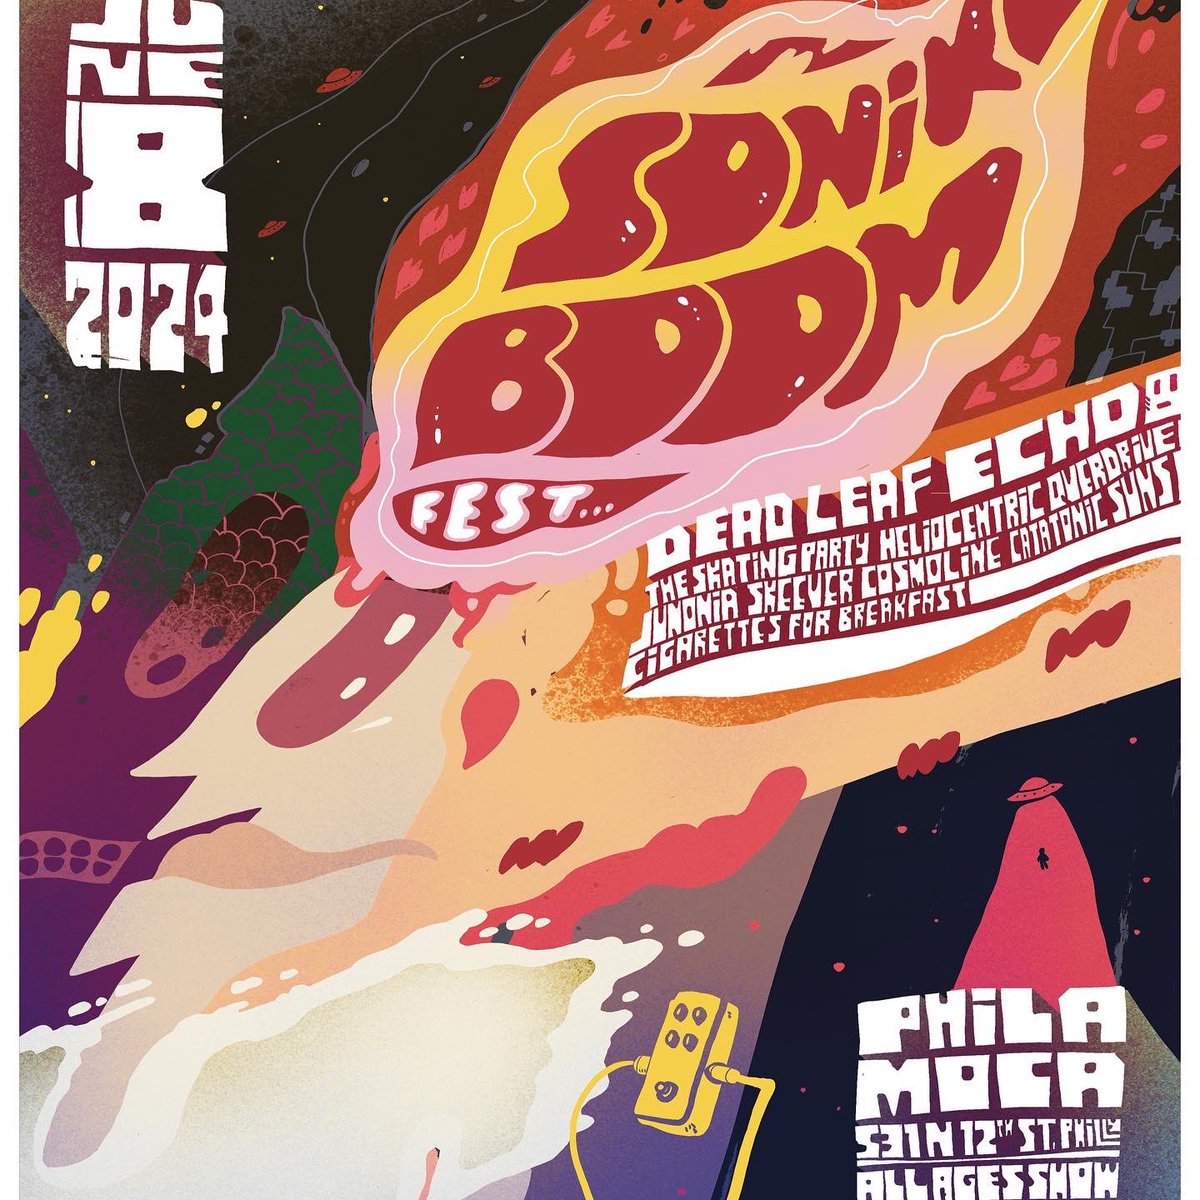 Announcing Sonik Boom Fest I Welcome to Sonik Boom Fest! Get ready for a day filled with Indierock, Shoegaze, Post Punk, and Dreampop music at PhilaMOCA. Join us for a celebration of all things alternative and indie. eventbrite.com/e/sonik-boom-f…